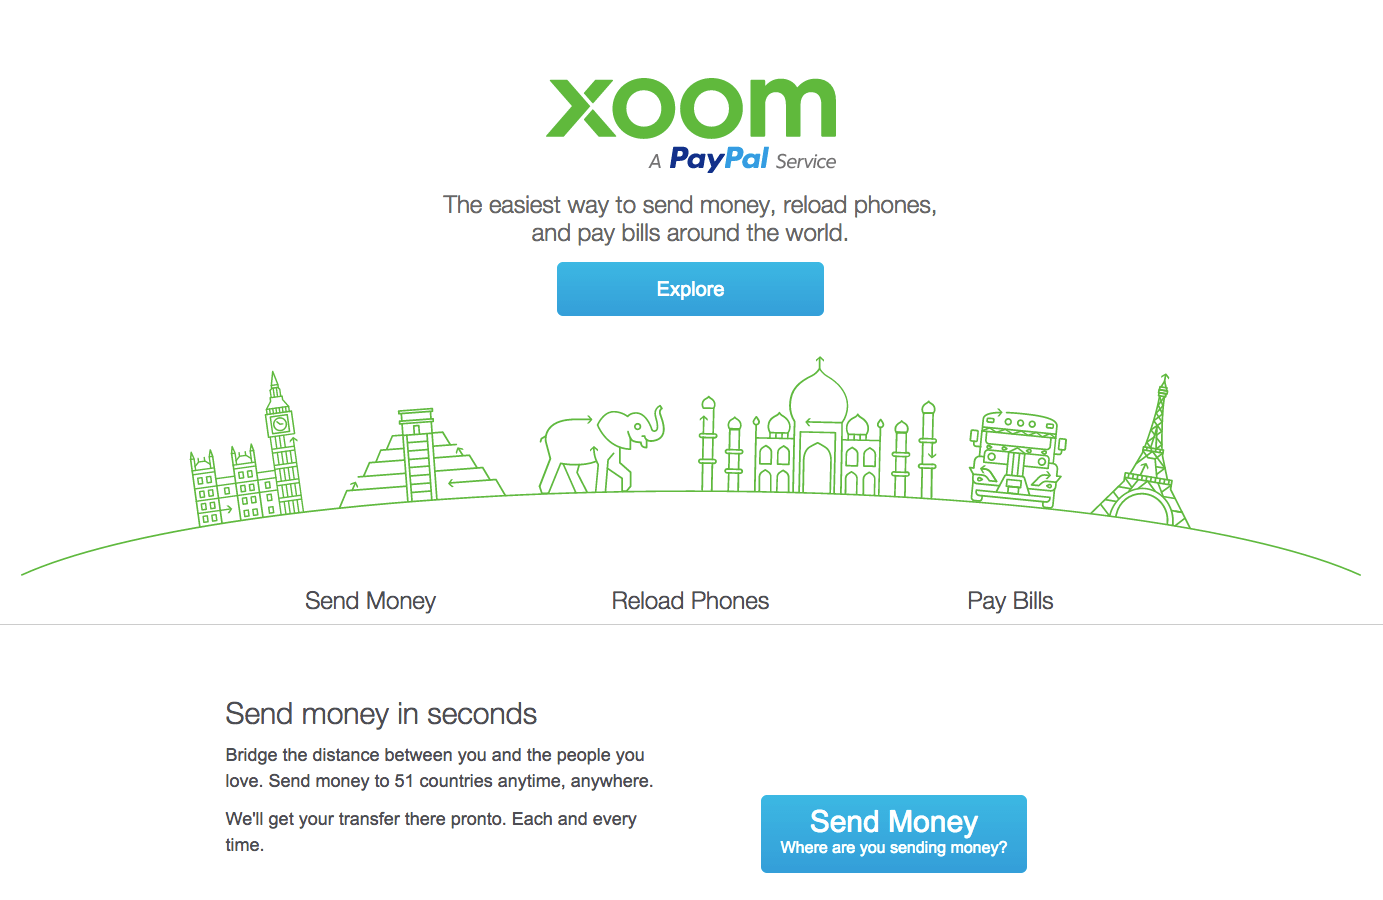 Xoom referral code 25 reward bonus paid to your PayPal after a first transfer